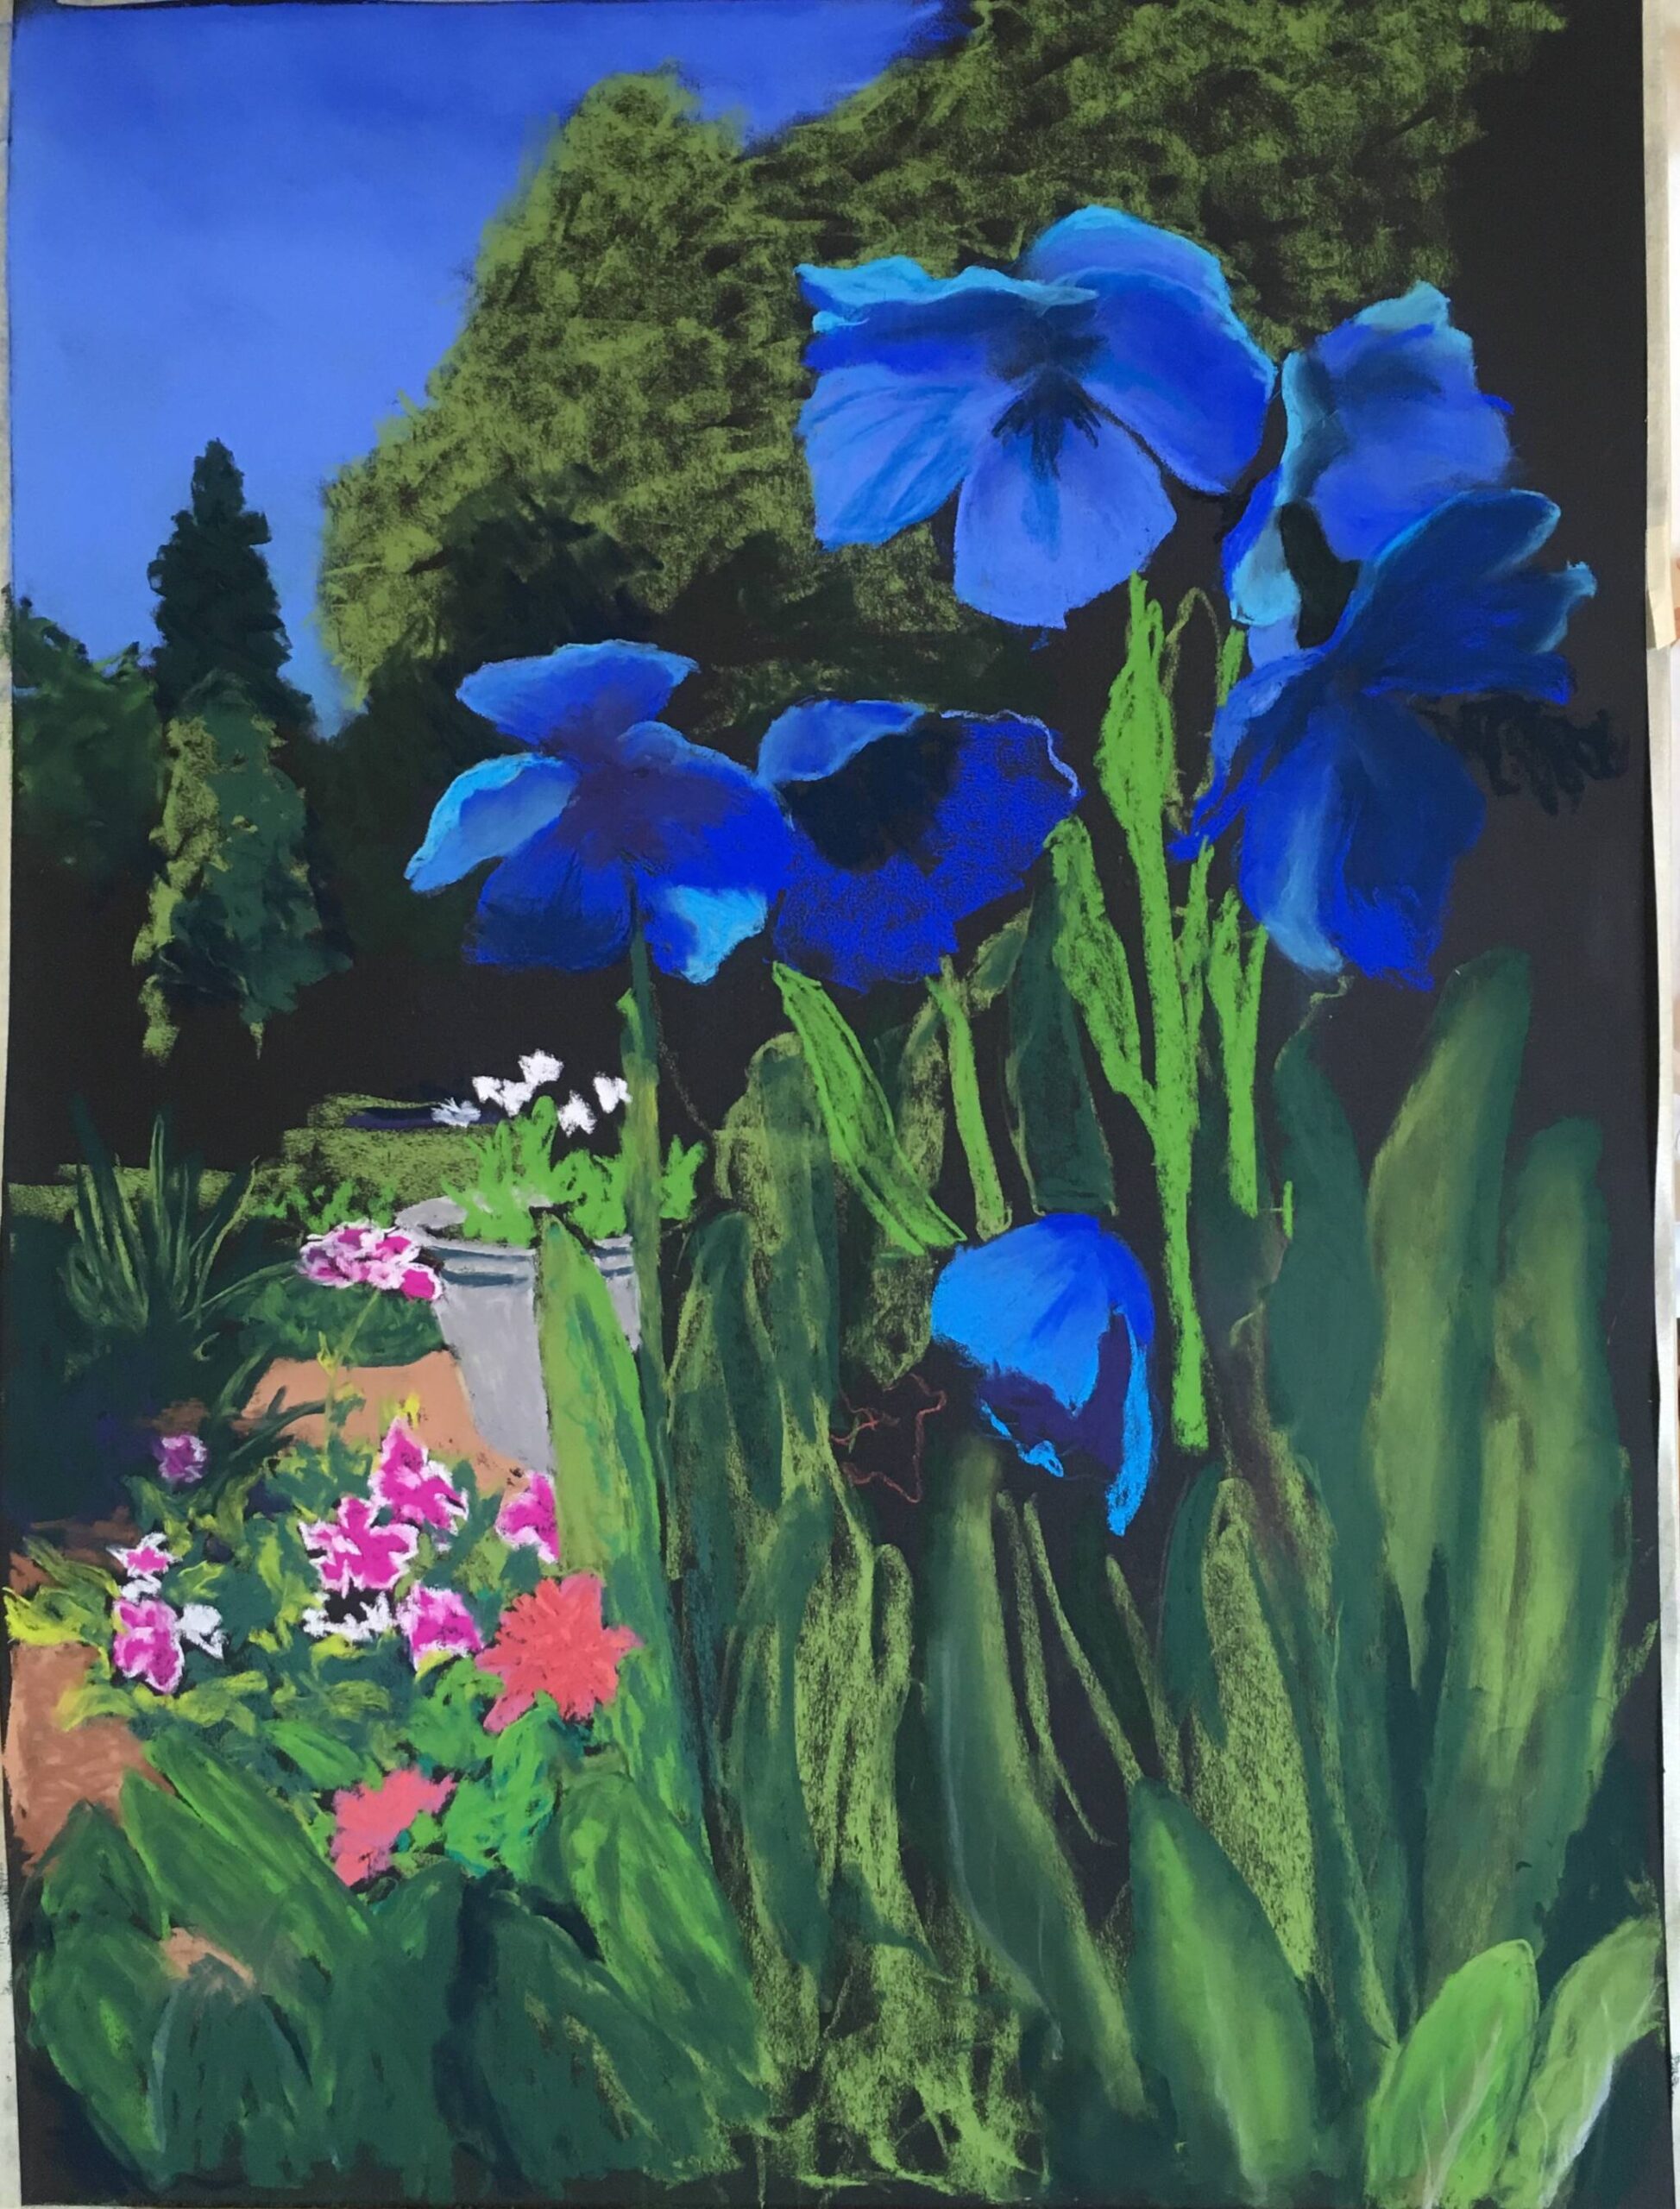 “Blue Poppies” pastel by Andie Sonneborn, who will be painting an oil or pastel during Ready Set Art. (Photo provided by Andie Sonneborn)